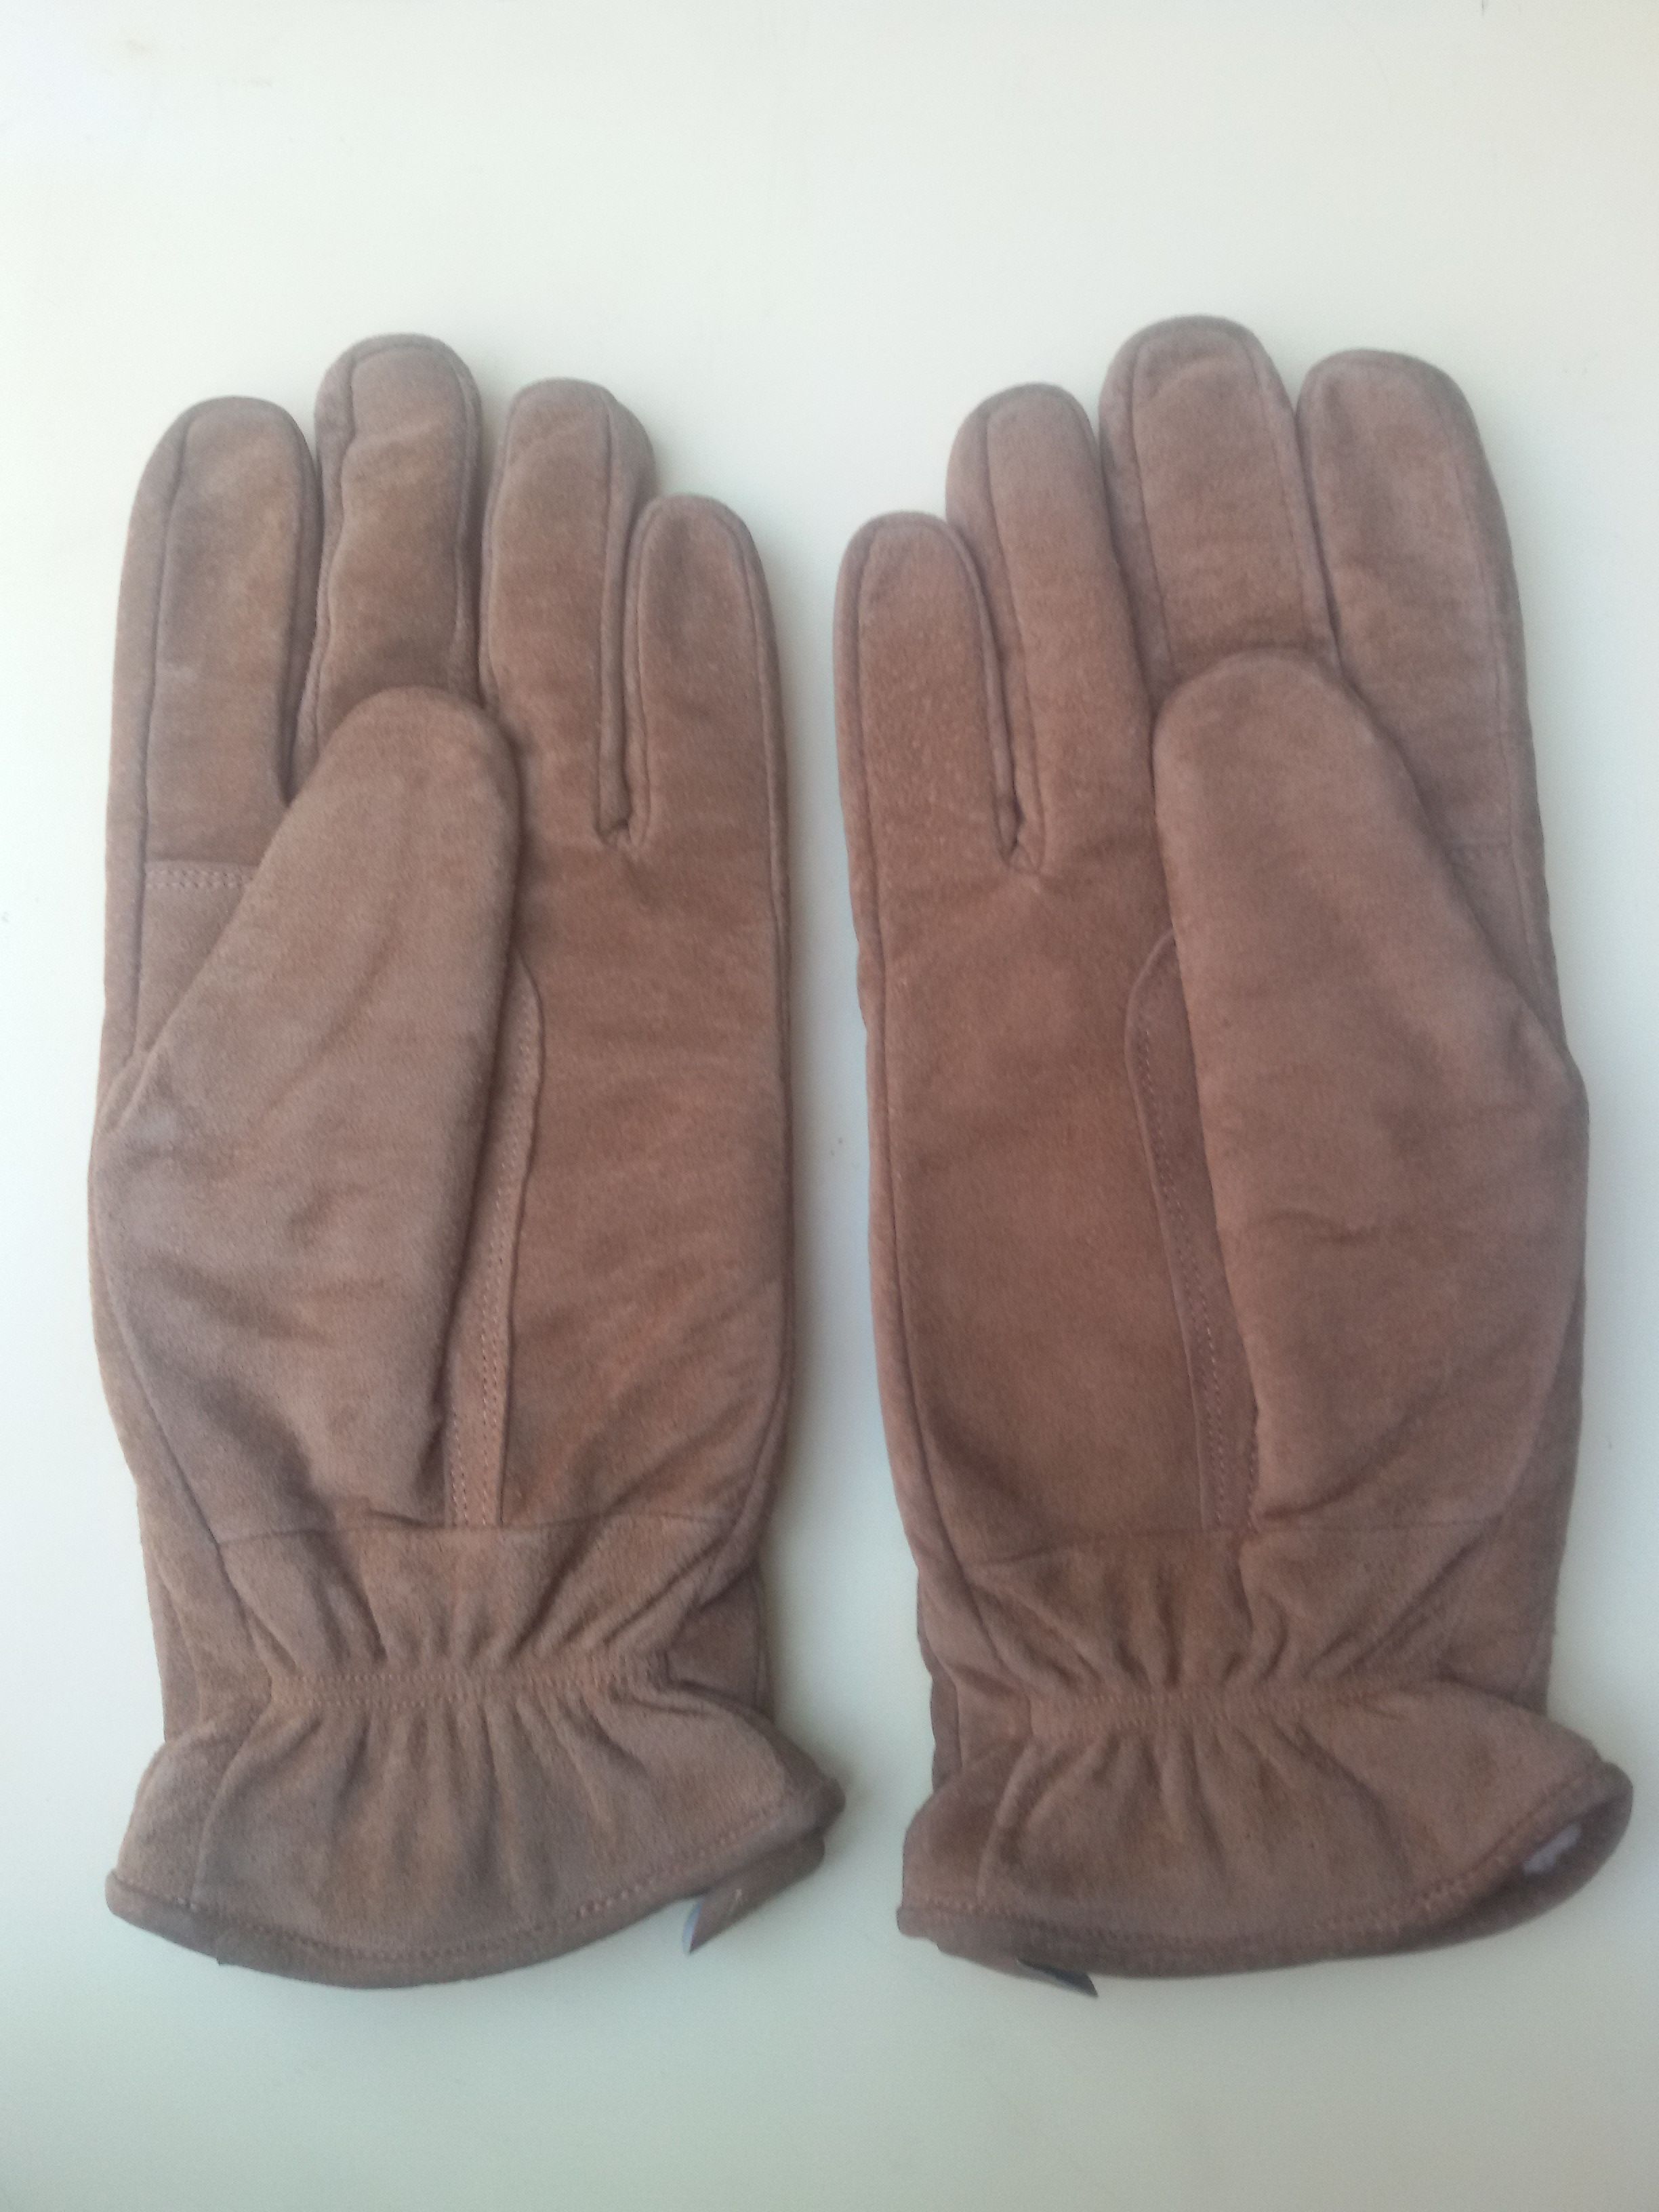 Gucci GUCCI Gloves Suede Leather Size 11 Vintage 1980's Size ONE SIZE - 2 Preview